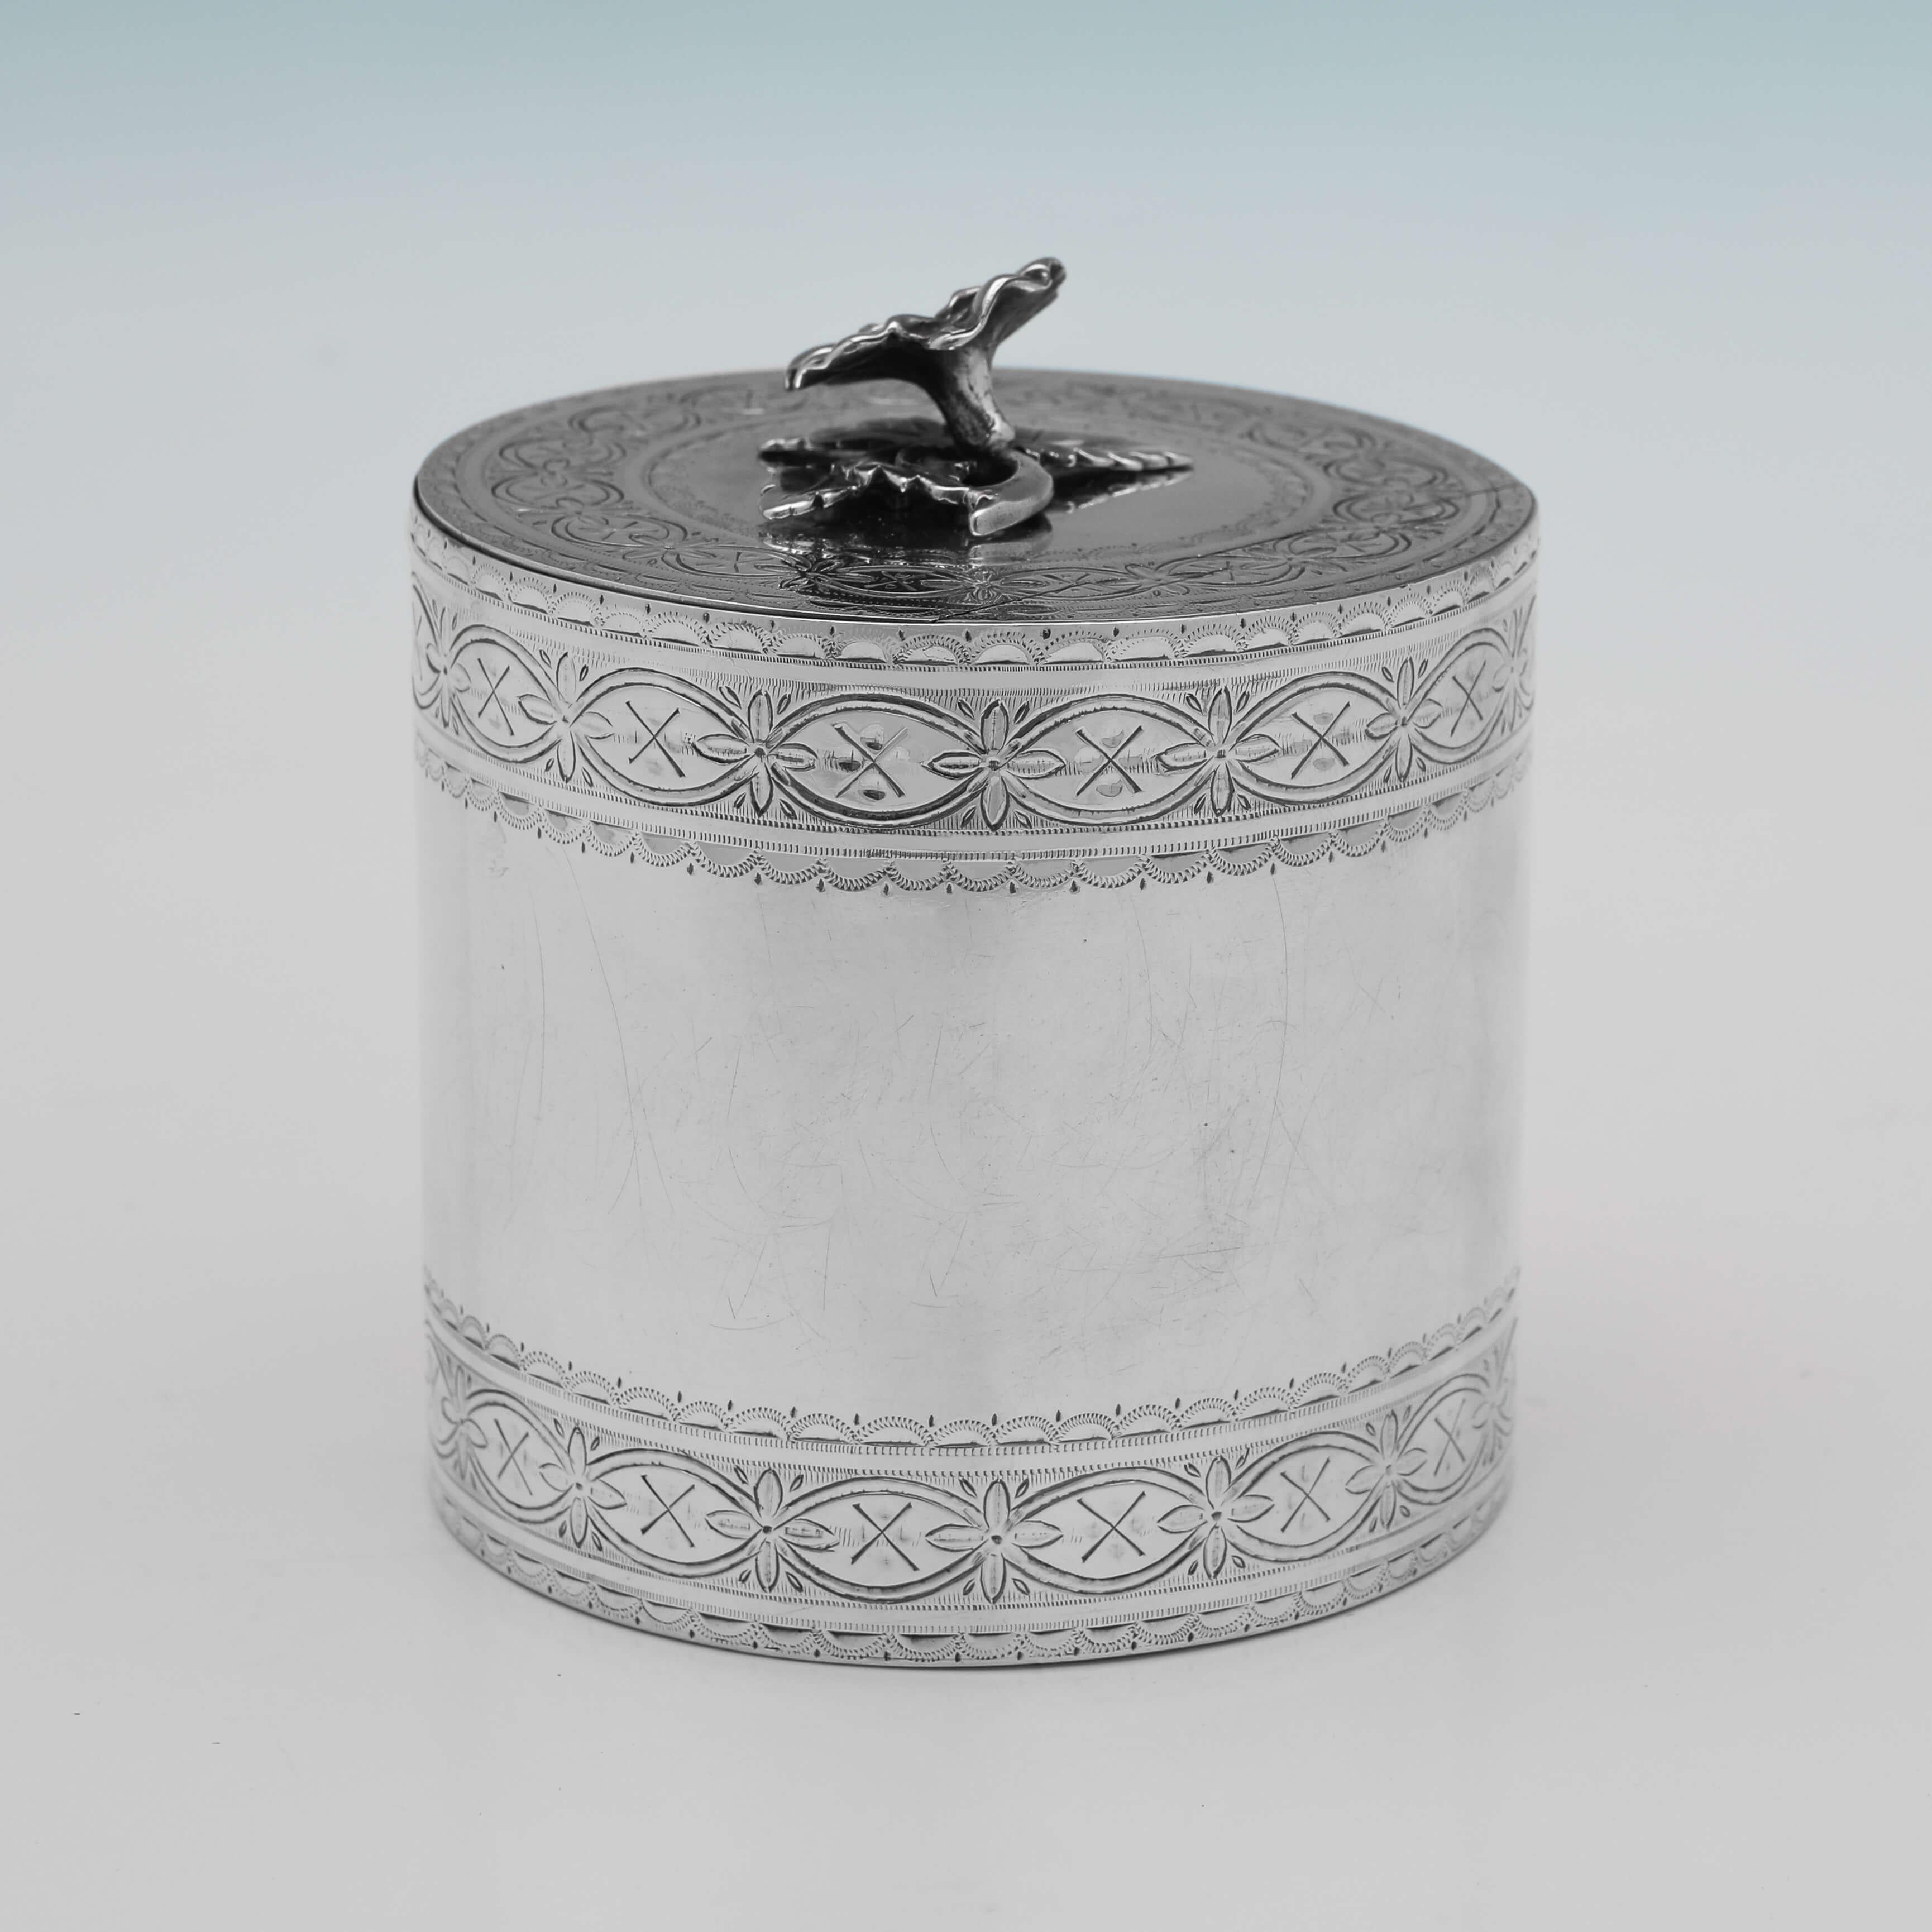 English Neoclassical George III Period Antique Sterling Silver Tea Caddy - London 1775 For Sale